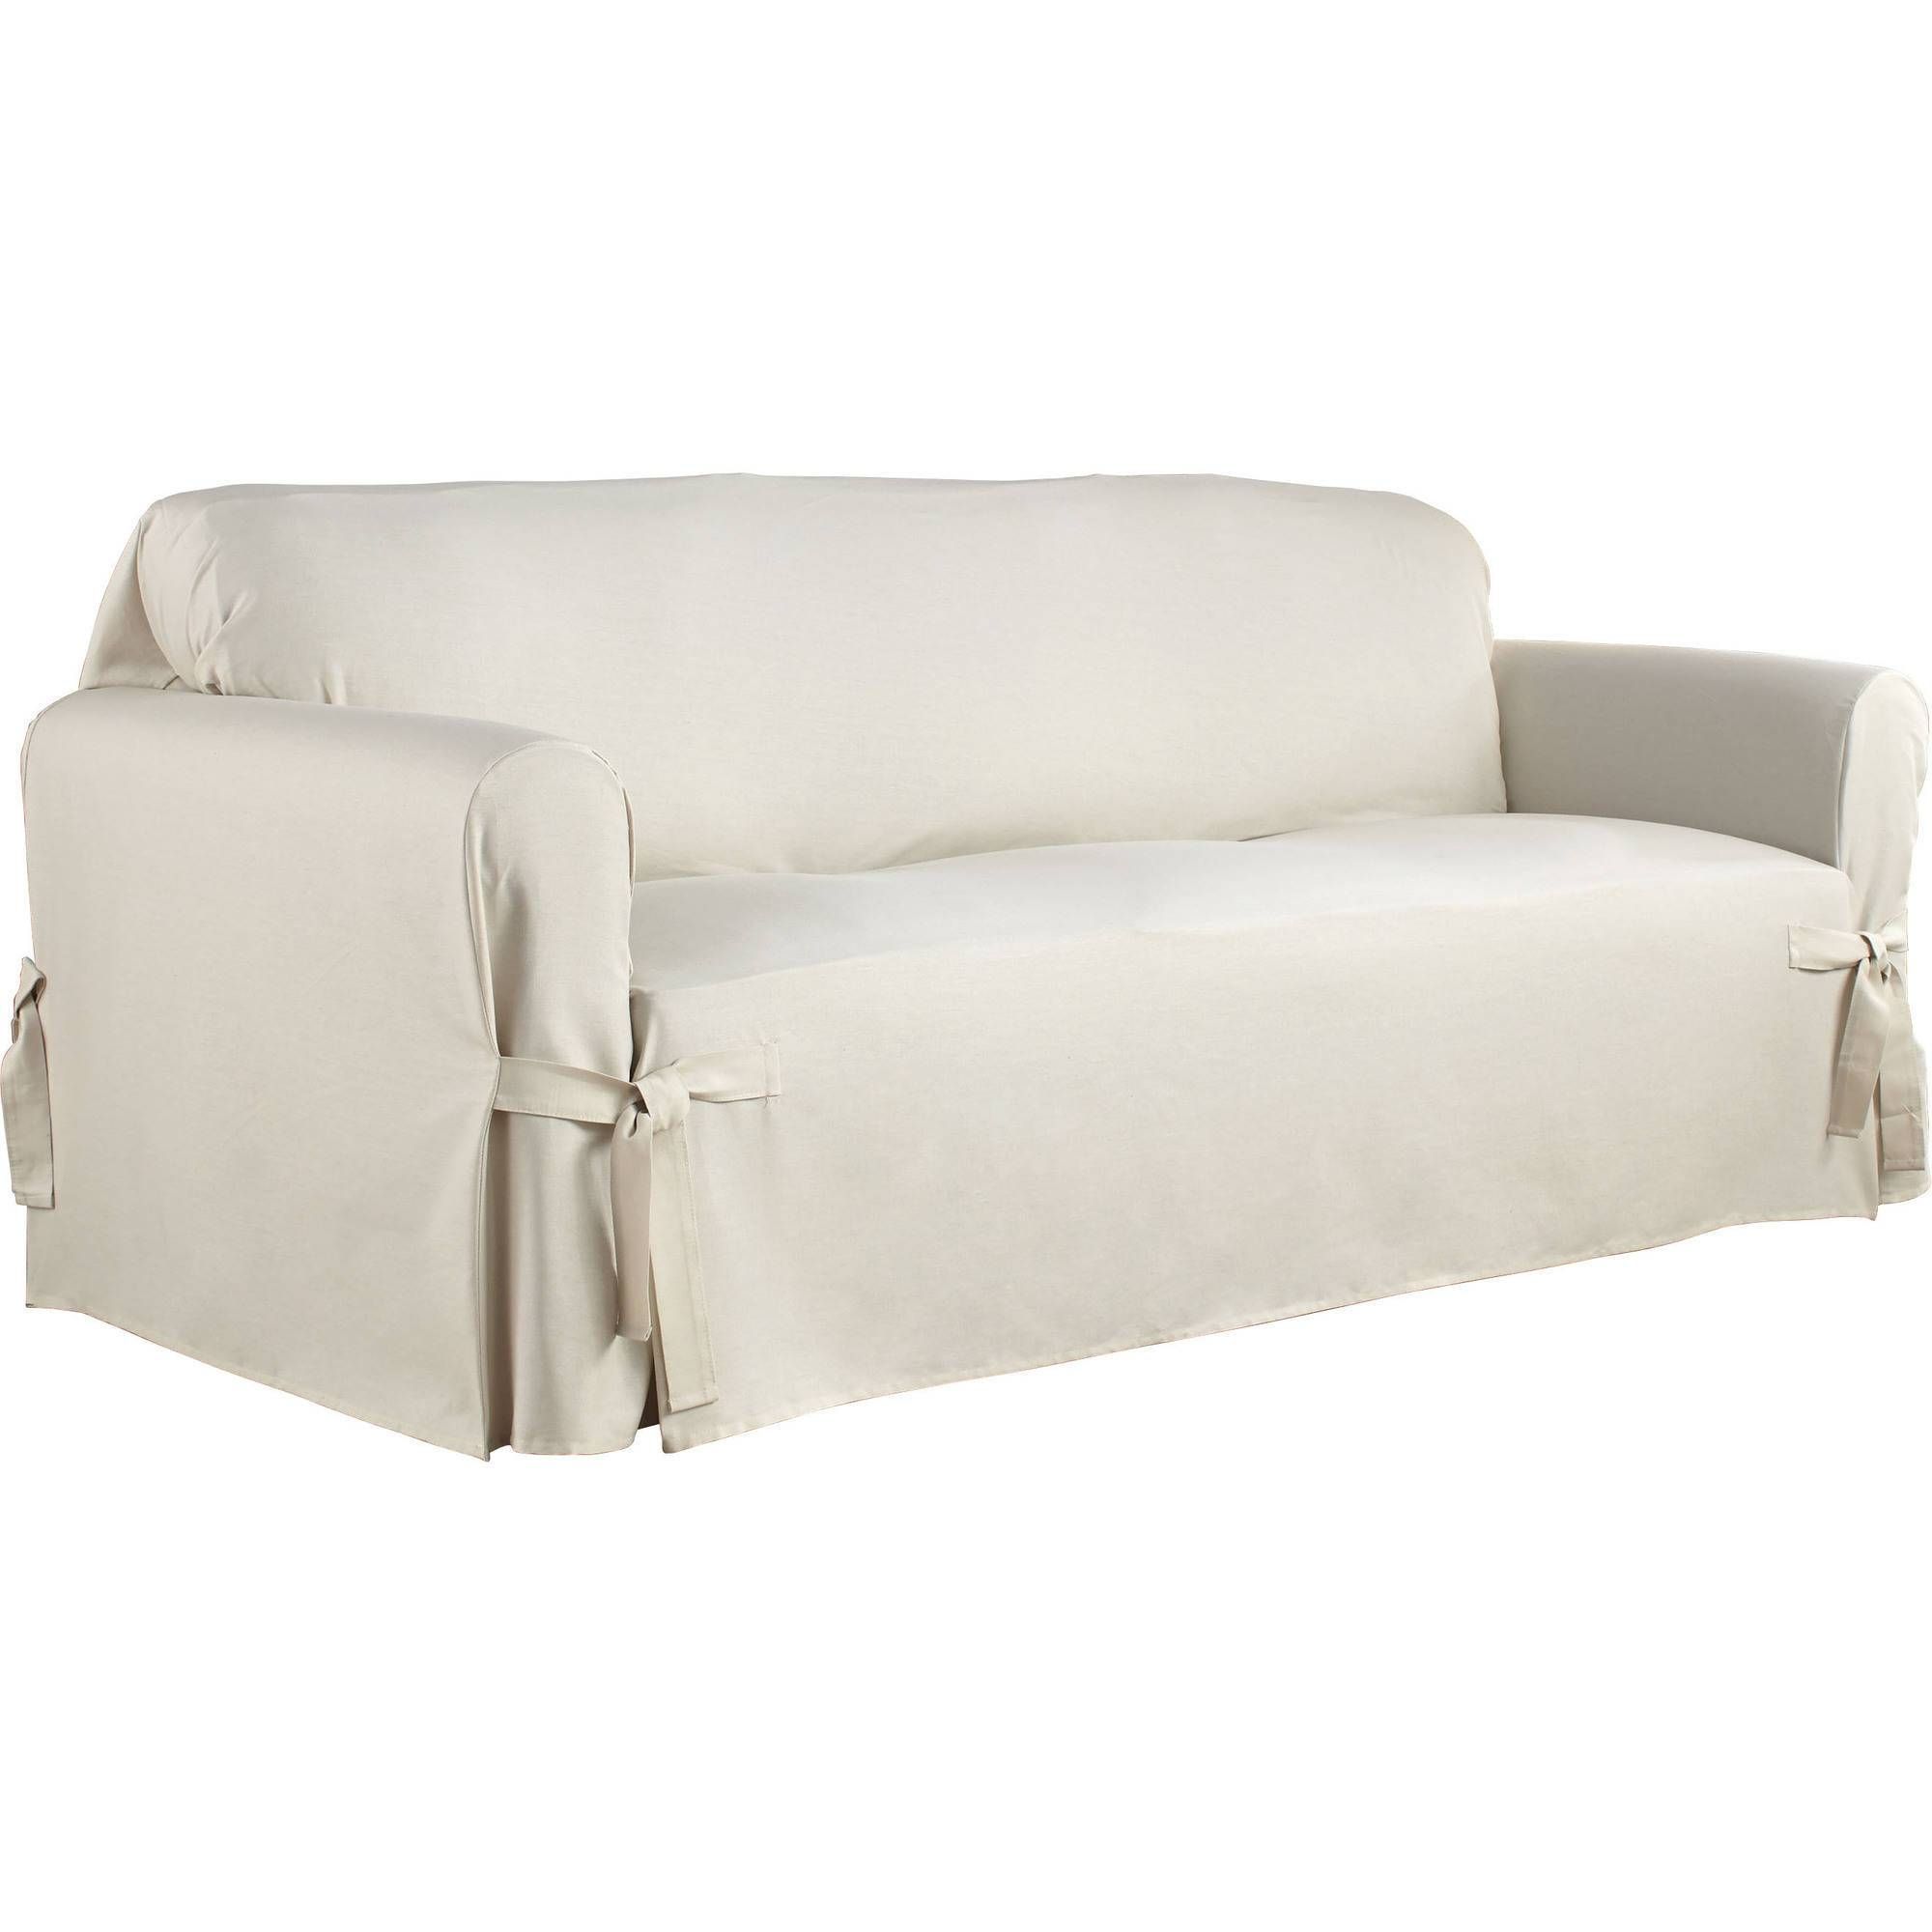 Furniture: Unique And Functional Furniture With Big Lots Sleeper Intended For Sleeper Sofa Slipcovers (View 12 of 15)